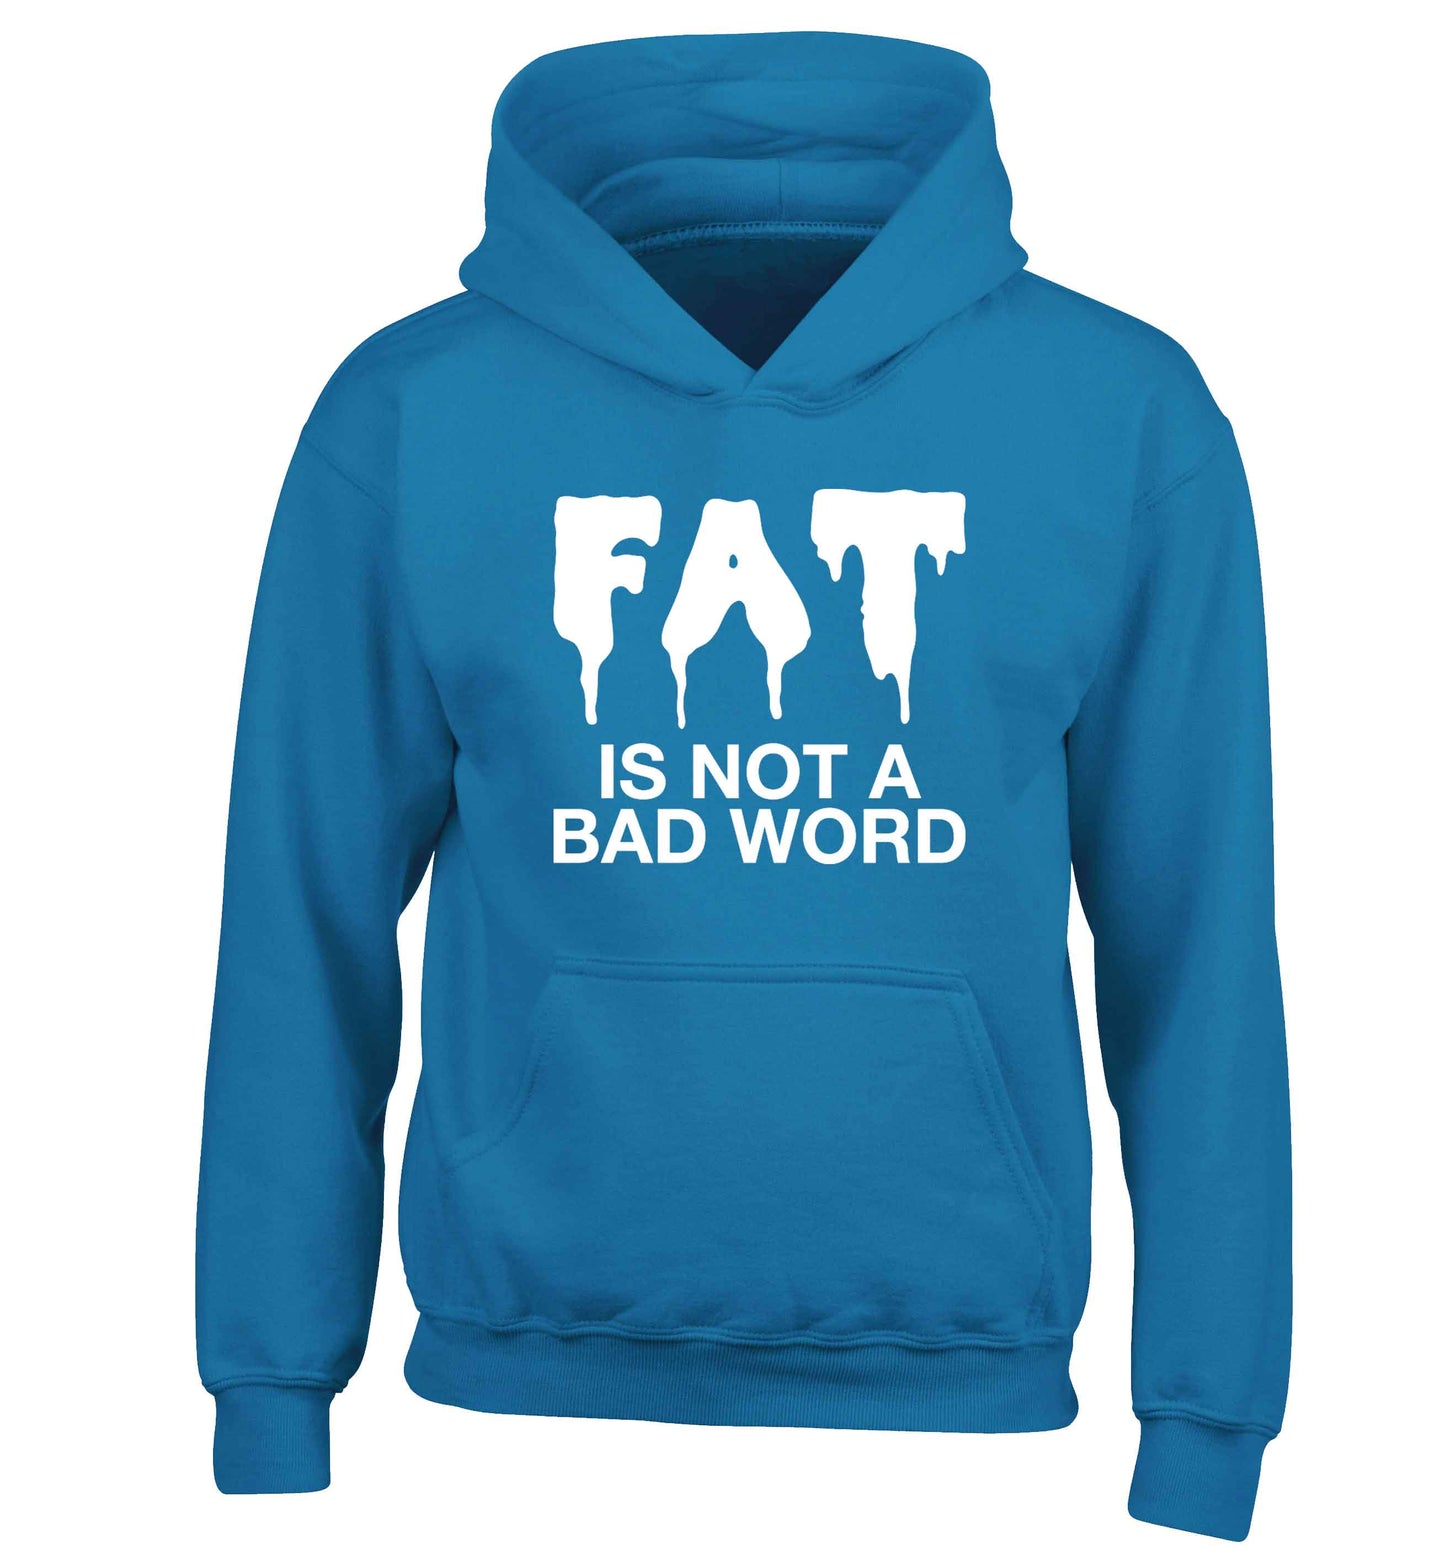 Fat is not a bad word children's blue hoodie 12-13 Years